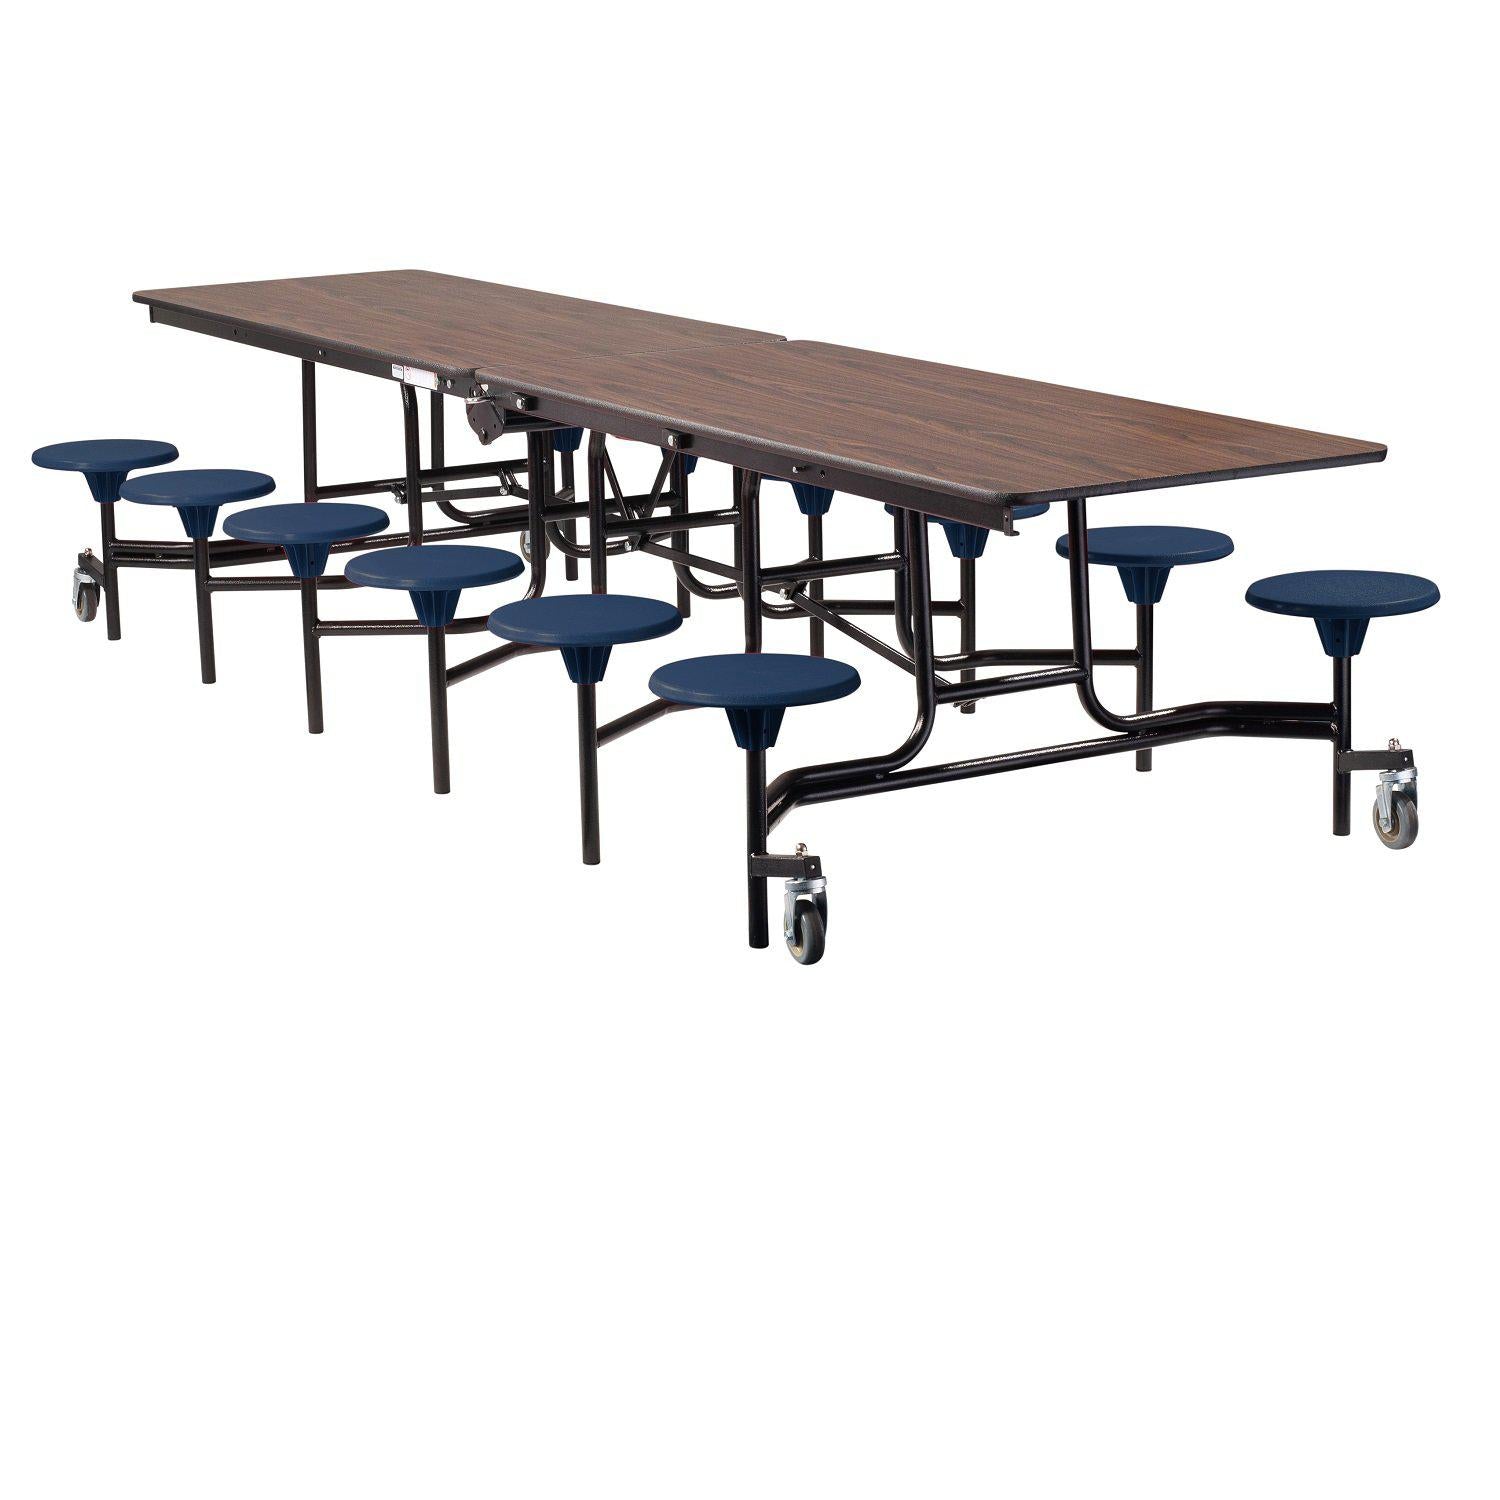 Mobile Cafeteria Table with 12 Stools, 12'L Rectangular, Particleboard Core, Vinyl T-Mold Edge, Textured Black Frame